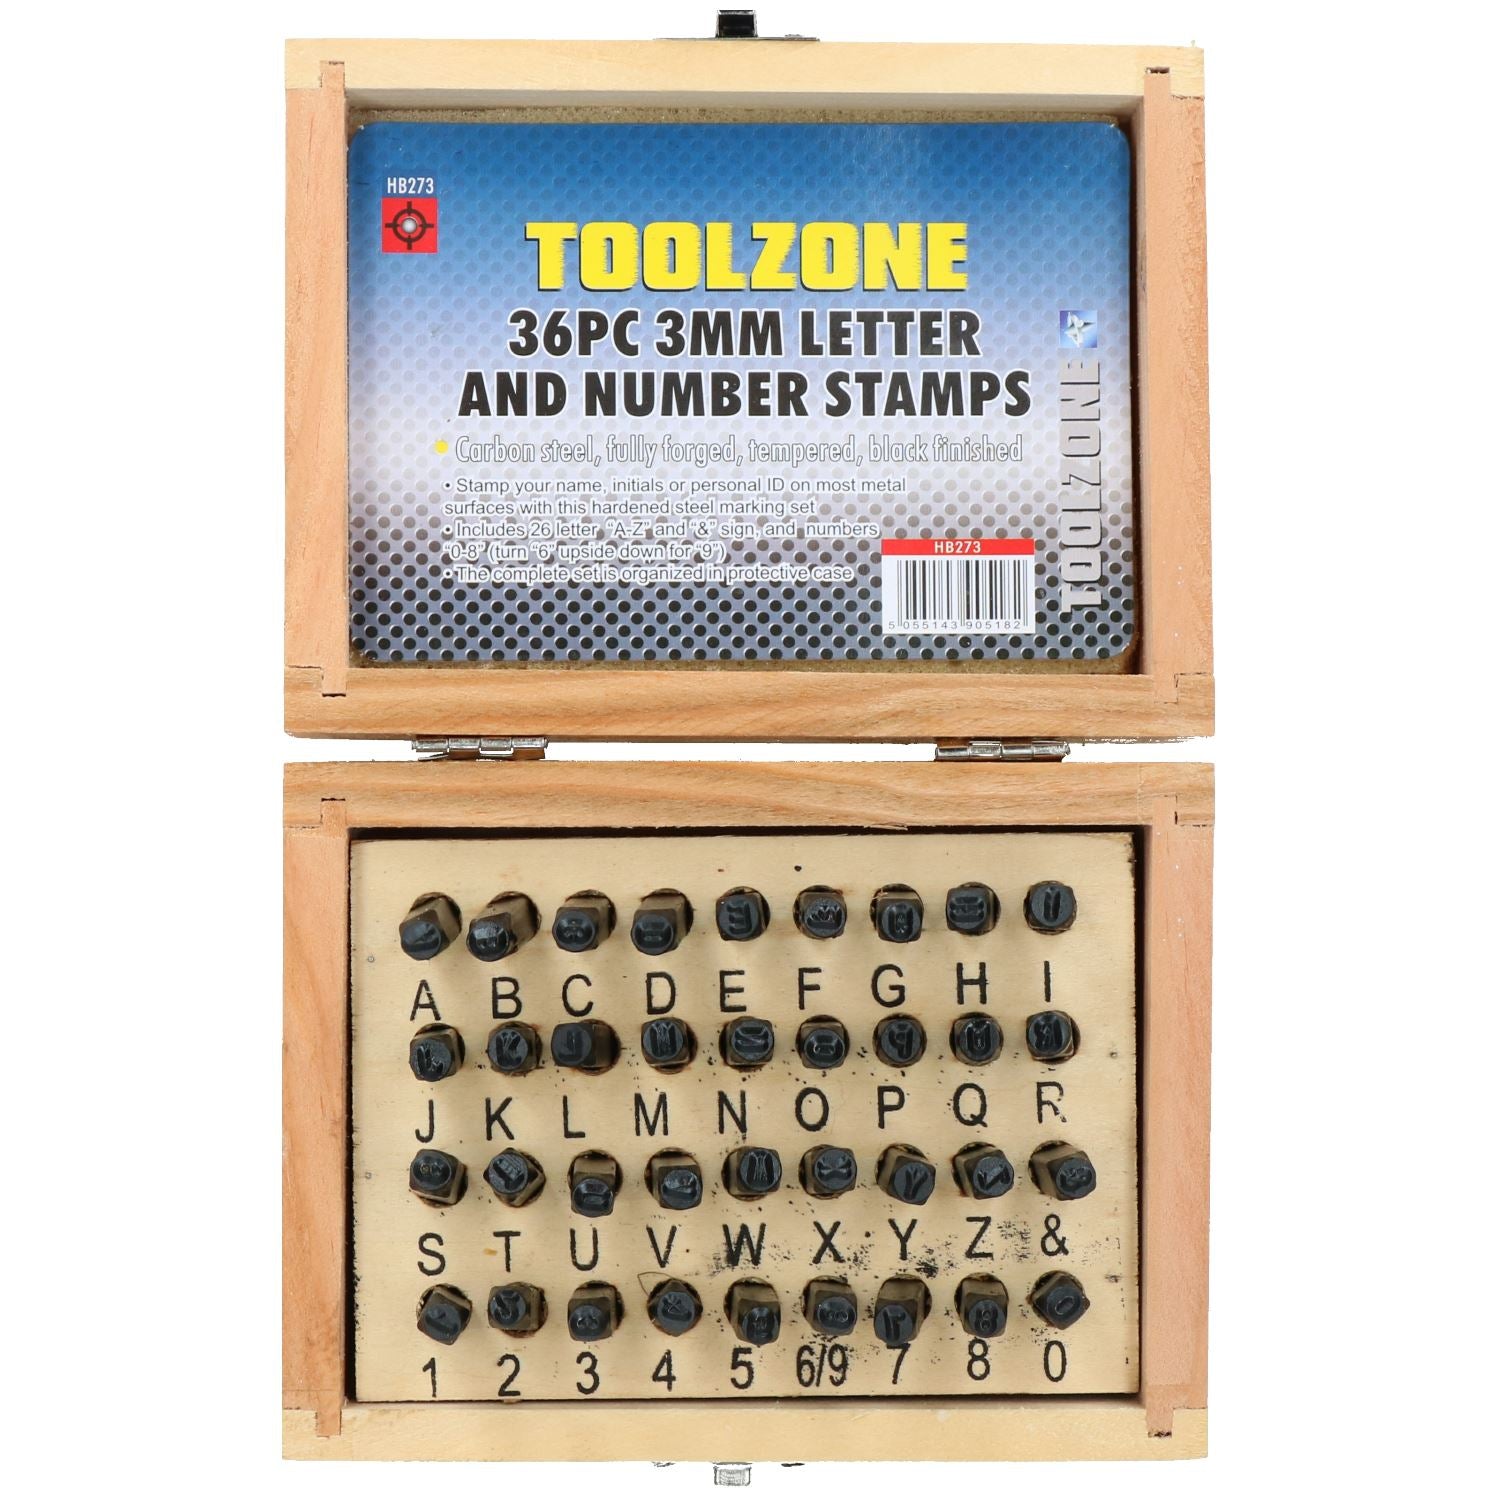 3mm 36pc Letter & Number Stamp Set Metal Punch Stamps TE132